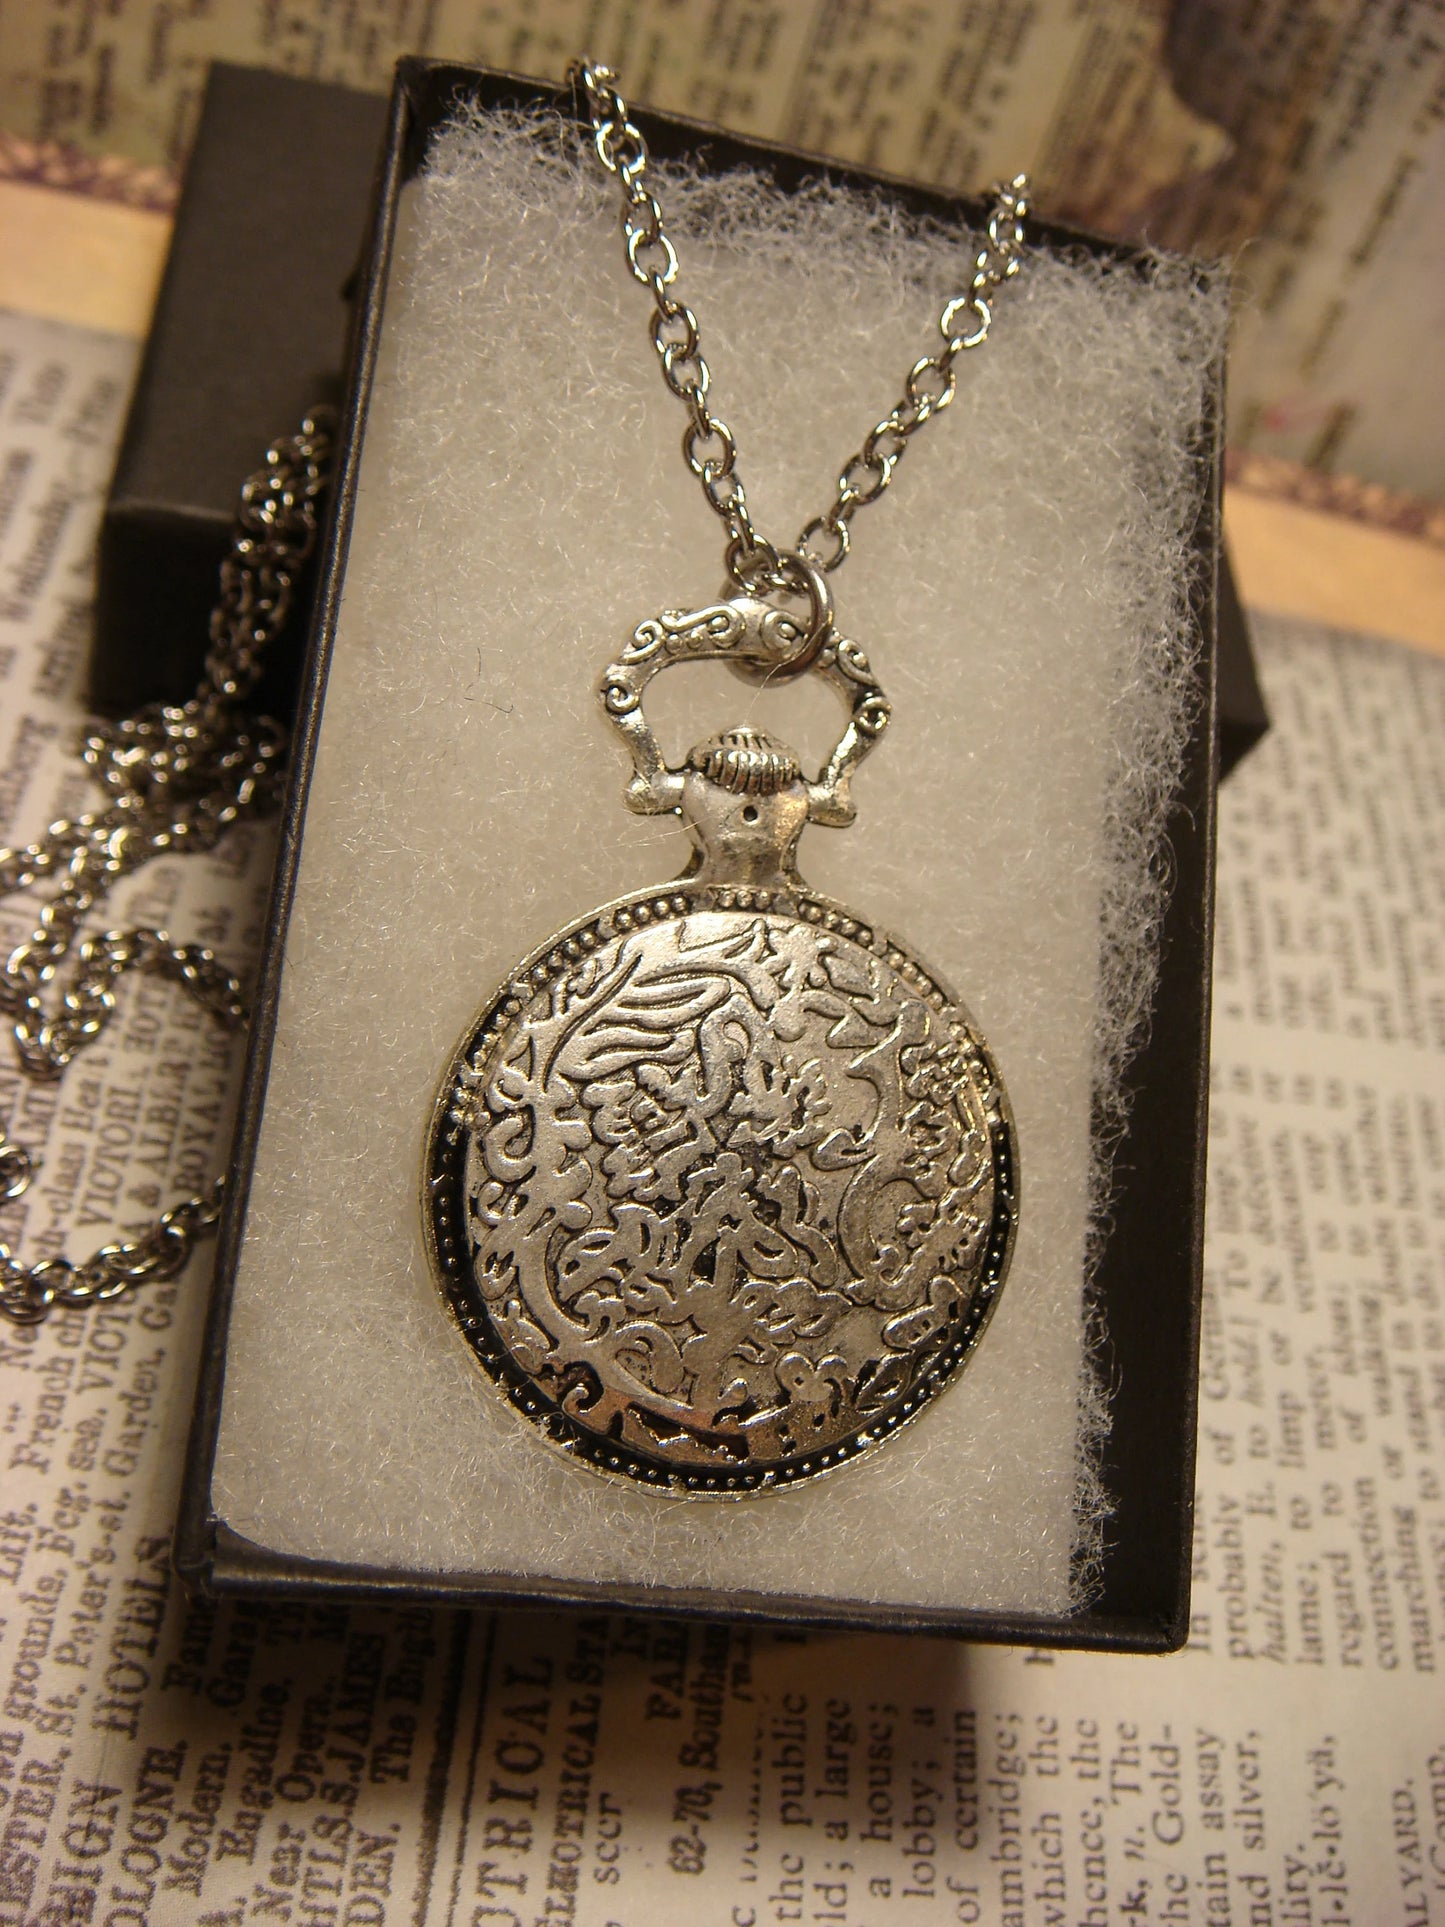 Tree Heart over Floral Clock Pocket Watch Pendant Necklace